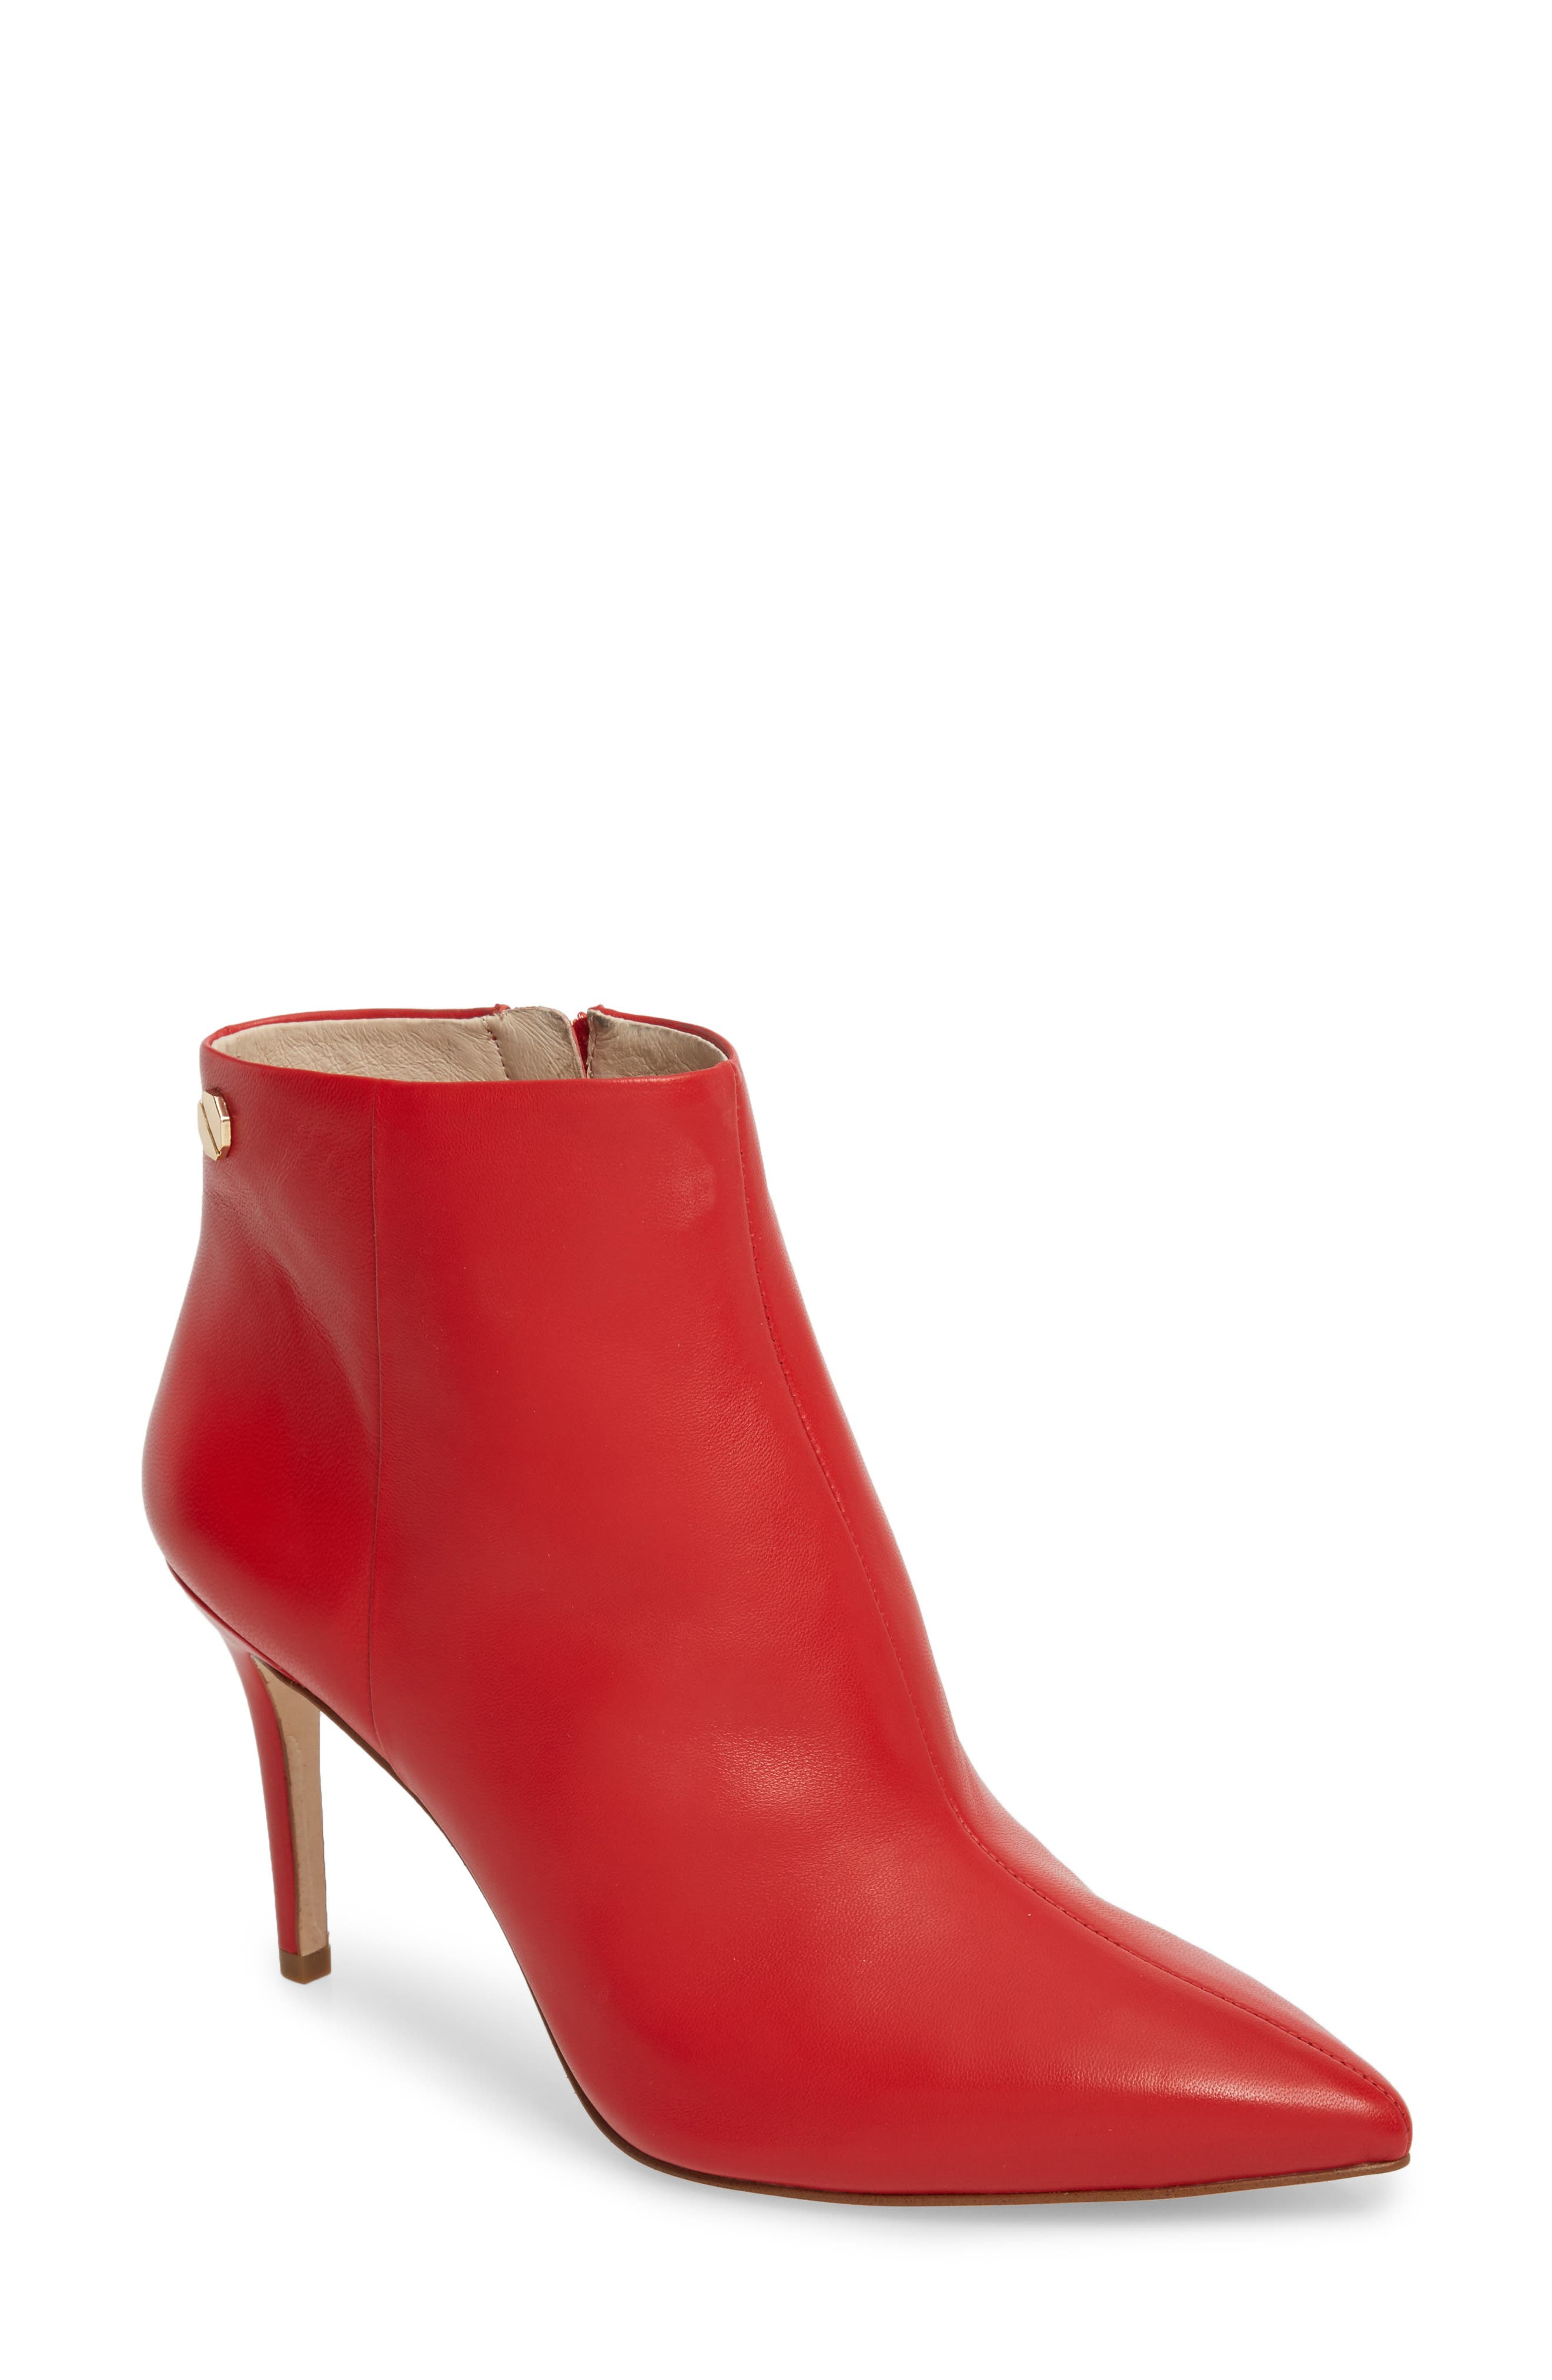 Louise et Cie Sonya Pointy Toe Bootie 